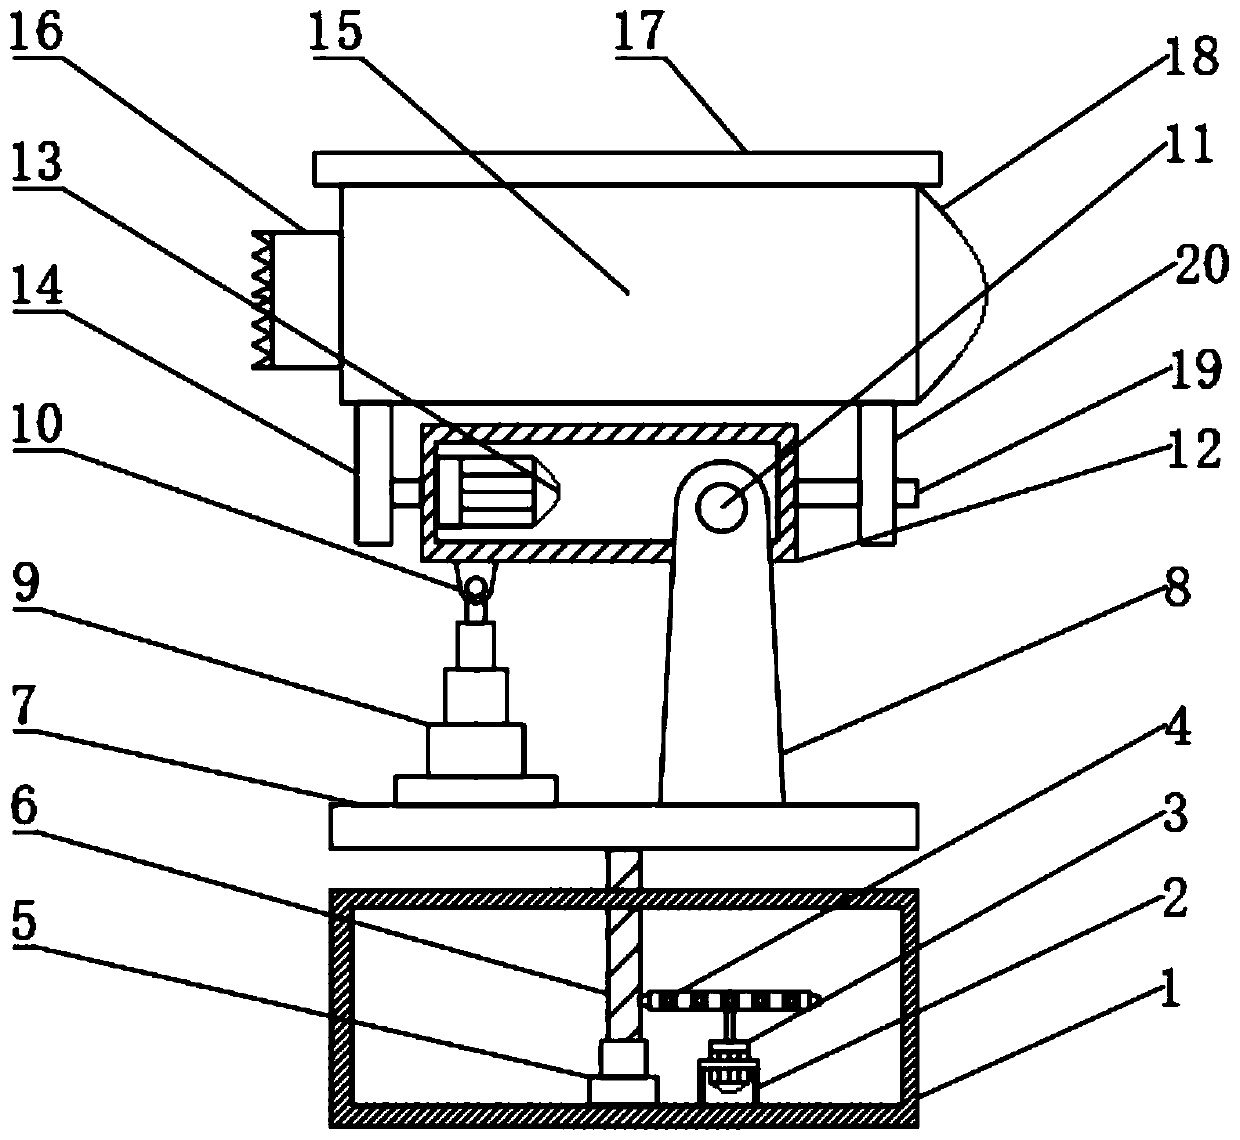 Structure for adjust projection lamp postures